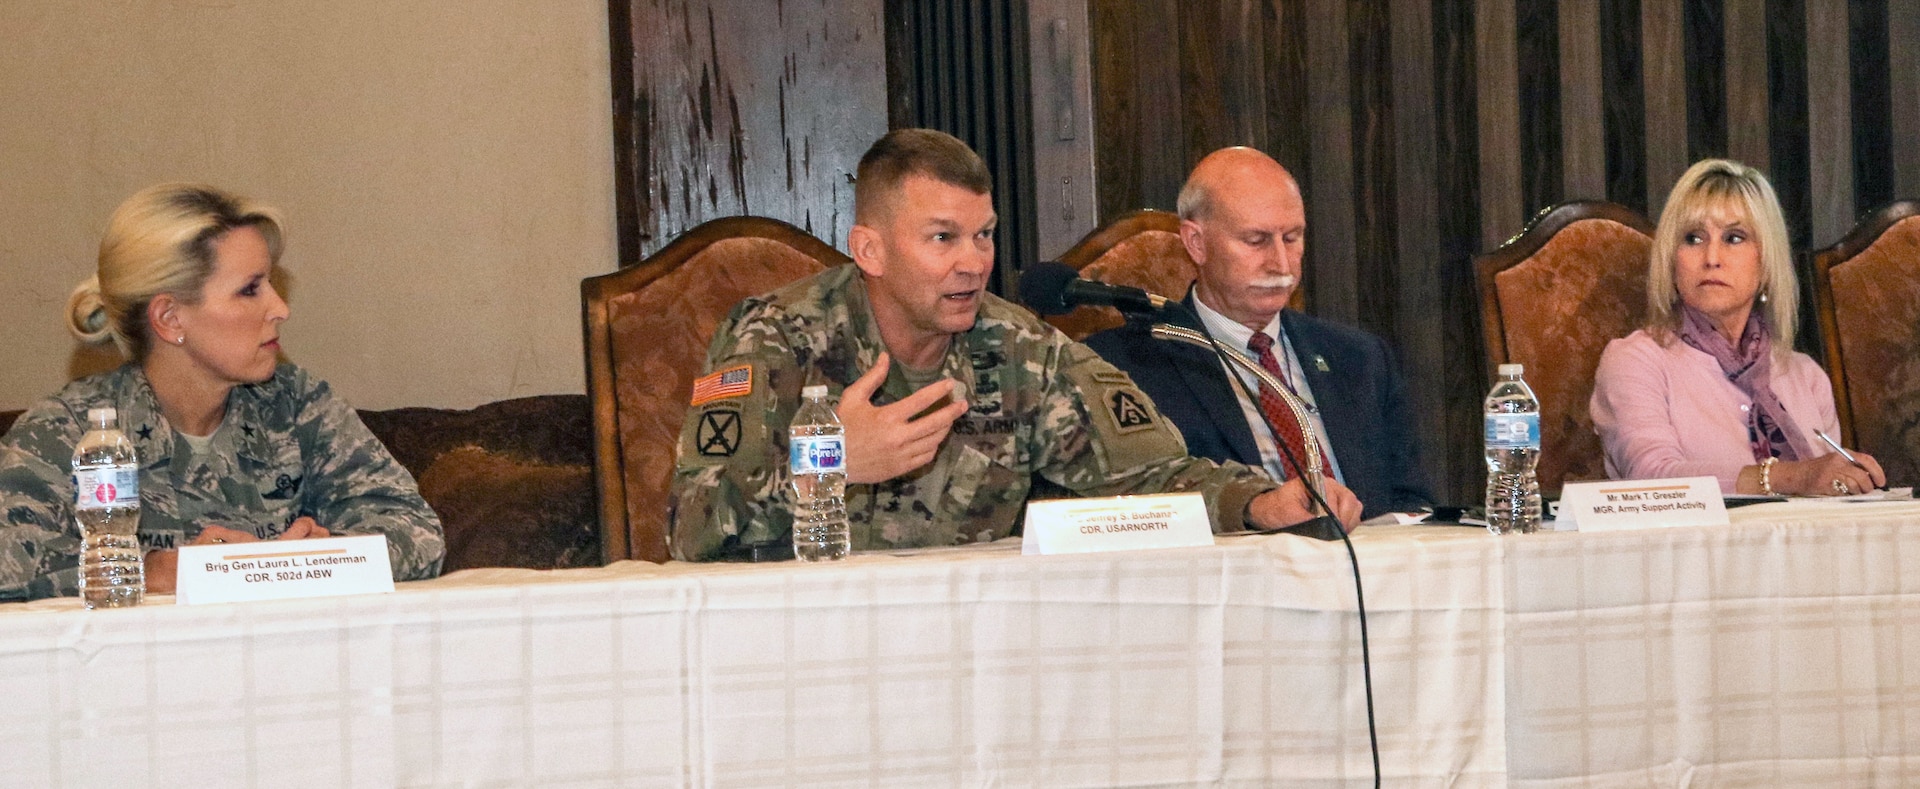 Lt. Gen. Jeffrey S. Buchanan (second from left), U.S. Army North Commander and Senior Army Commander for Joint Base San Antonio-Fort Sam Houston, as well as leaders from JBSA-Fort Sam Houston like Brig. Gen. Laura L. Lenderman (left), 502nd Air Base Wing and JBSA commander, and Lincoln Military Housing officials answer questions and address issues from Soldiers and their families during a town hall meeting at the Lincoln Military Housing Community Center Feb. 21. The town hall was a platform for Soldiers and family members to provide information and gain feedback as part of an ongoing U.S. Army-wide effort to resolve unsatisfactory conditions in Army family housing.